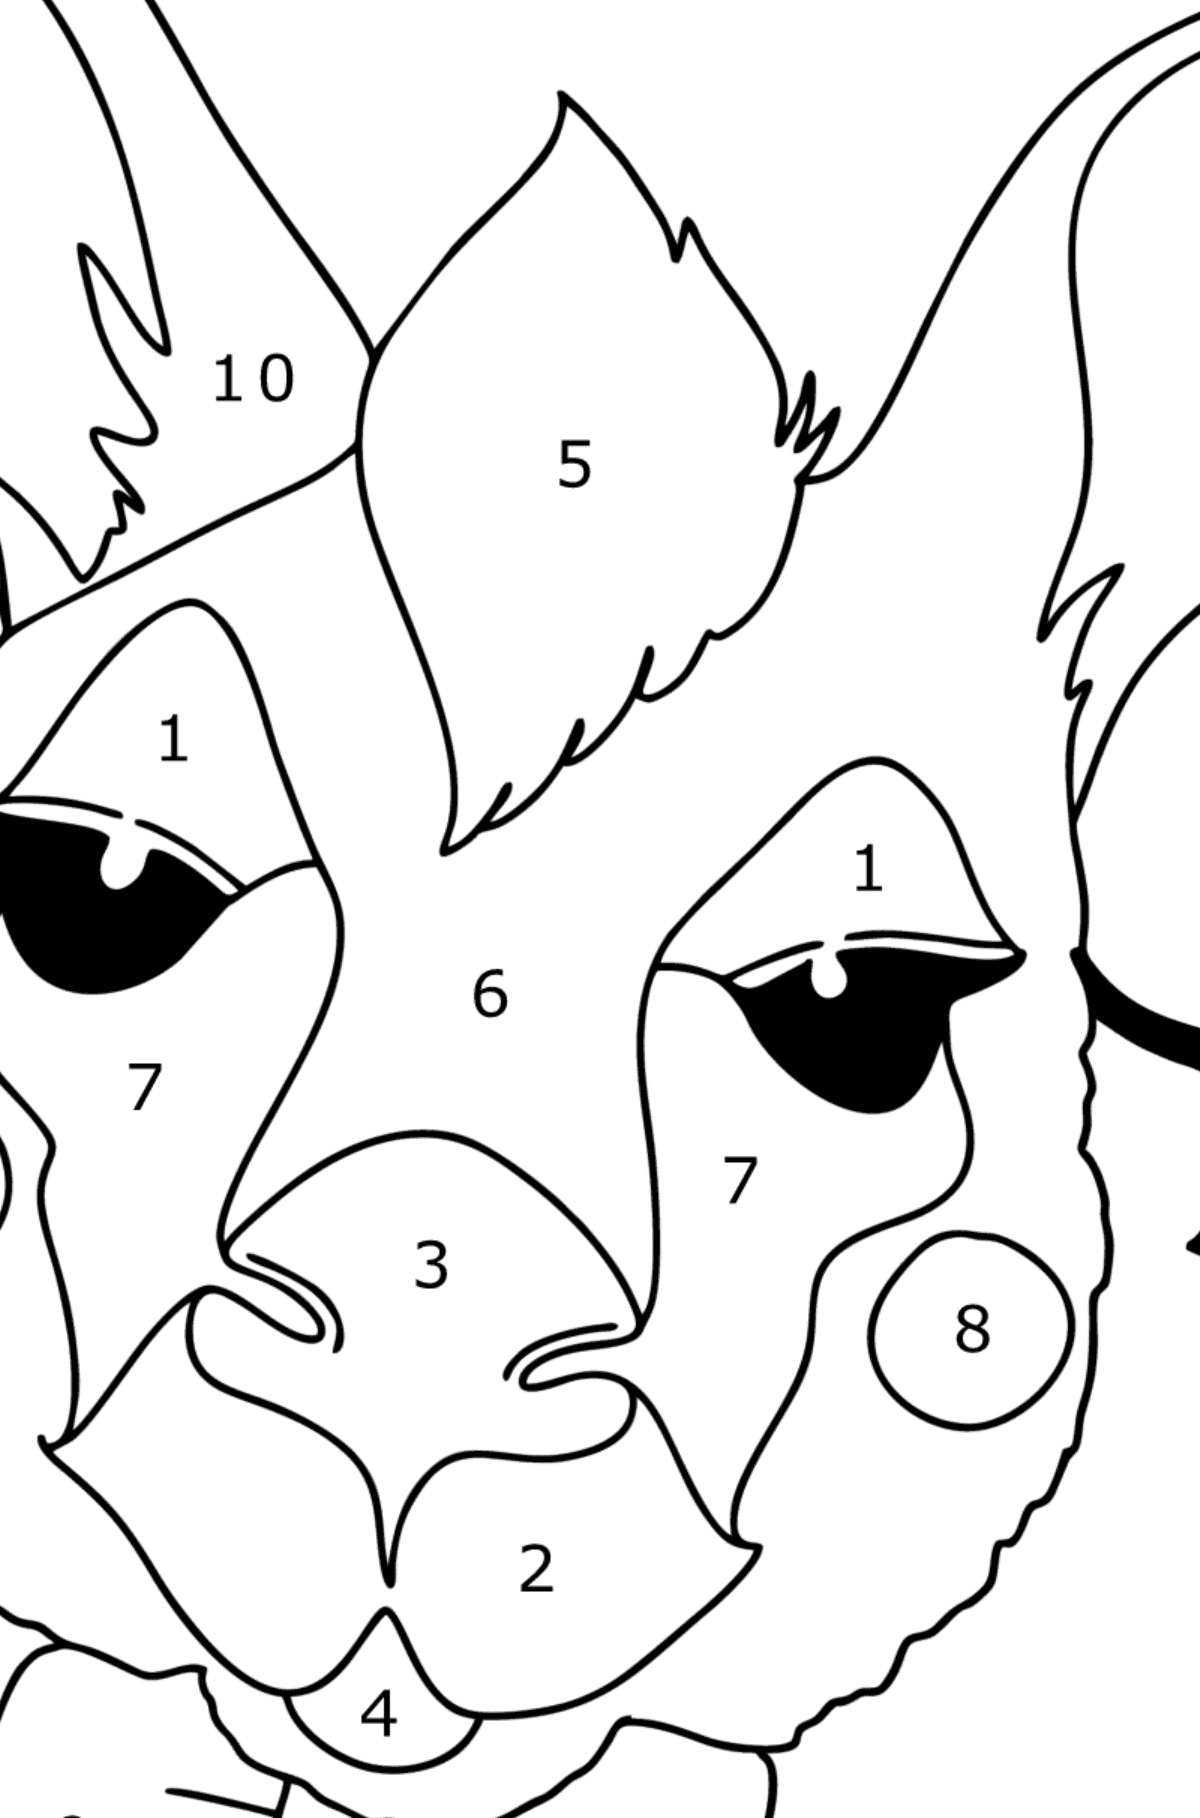 Kangaroo Mask coloring page - Coloring by Numbers for Kids